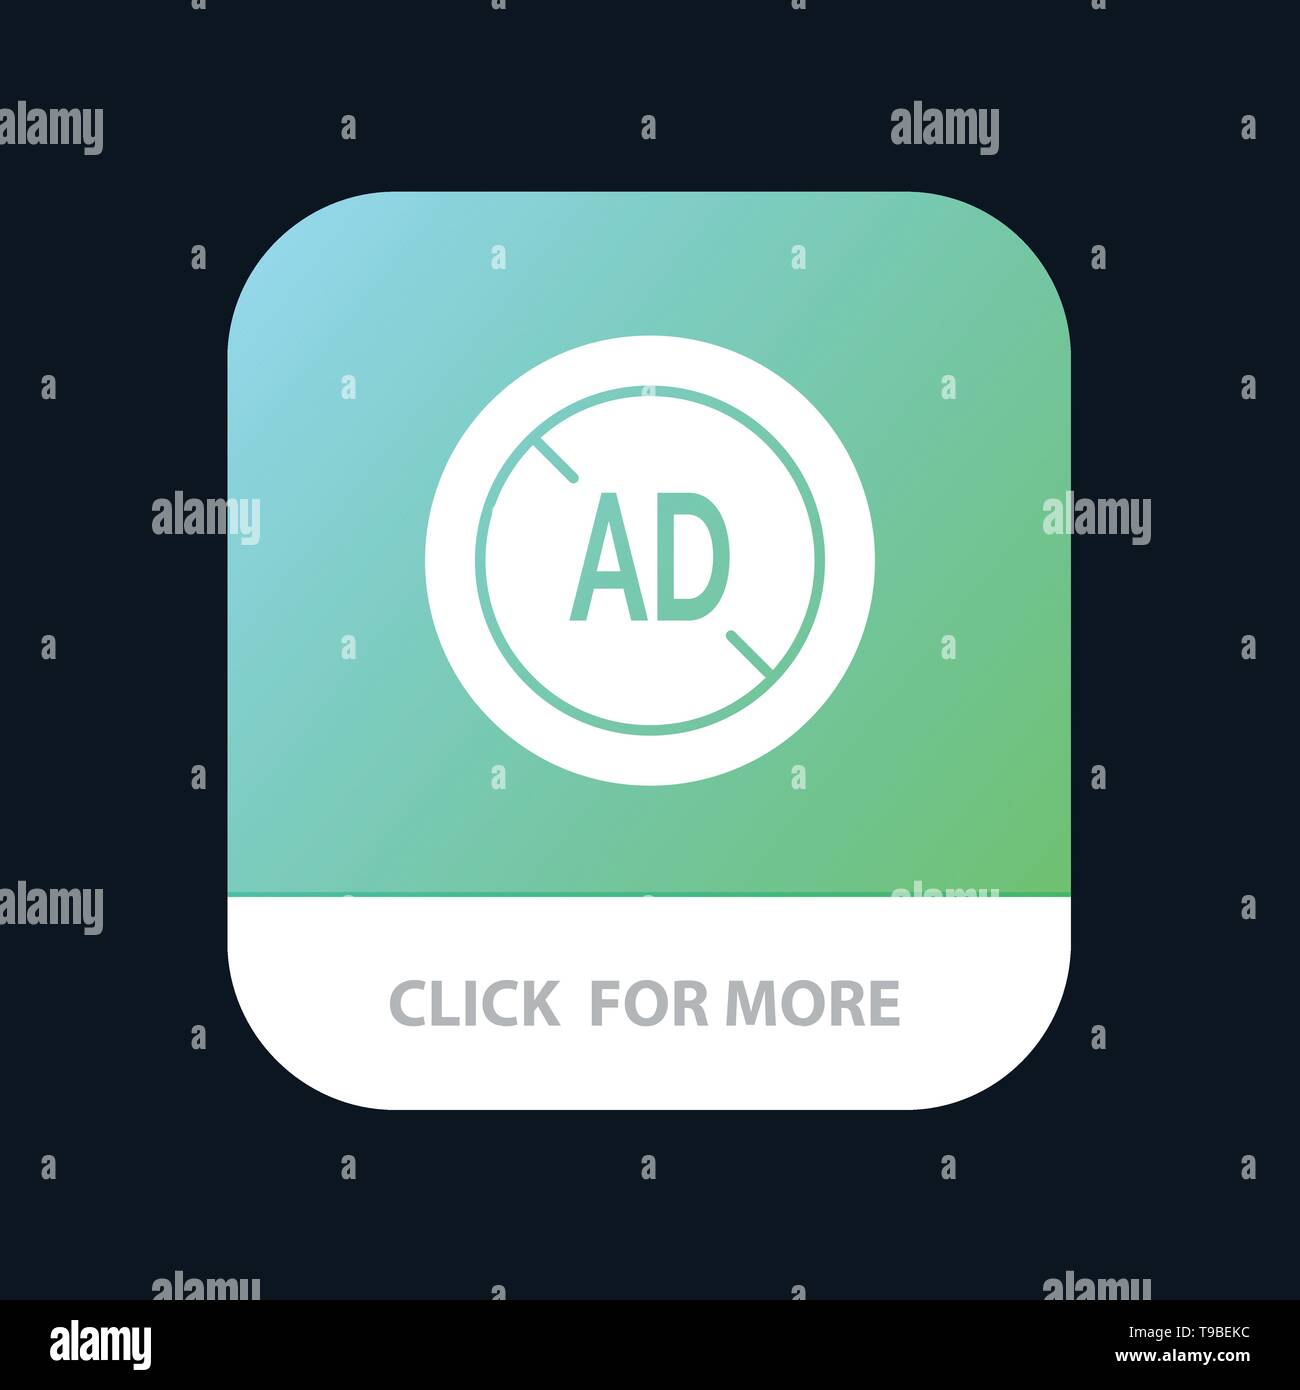 Ad, Blocker, Ad Blocker, Digital Mobile App Button. Android and IOS Glyph Version Stock Vector